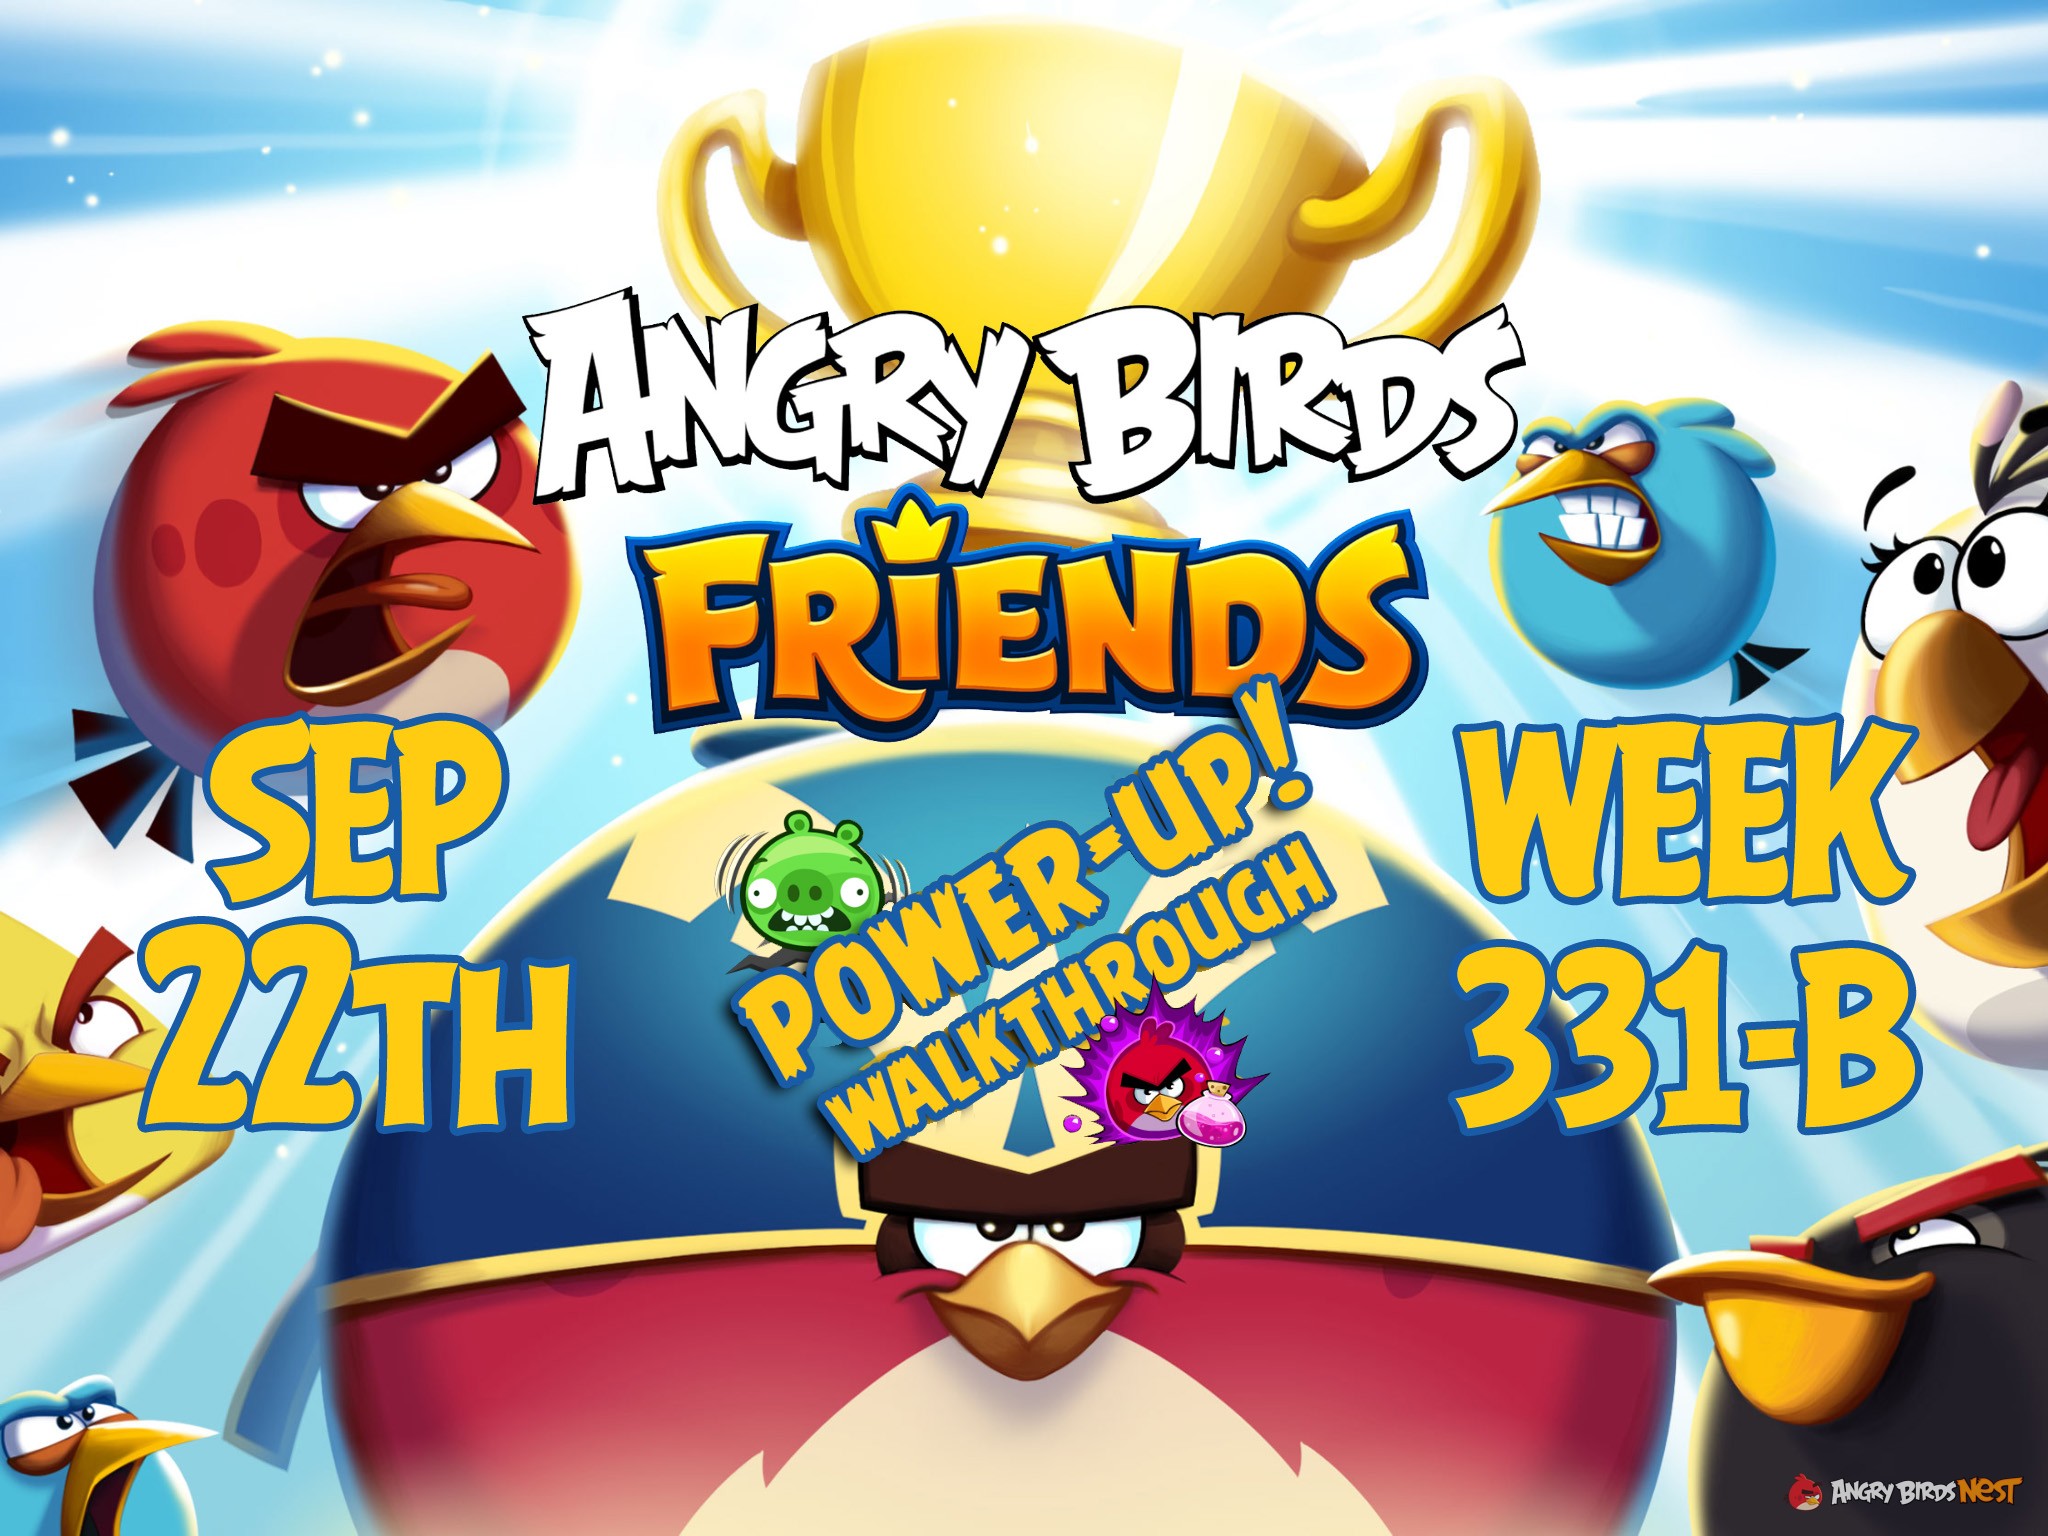 Angry-Birds-Friends-Tournament-Week-331-B-Feature-Image-PU